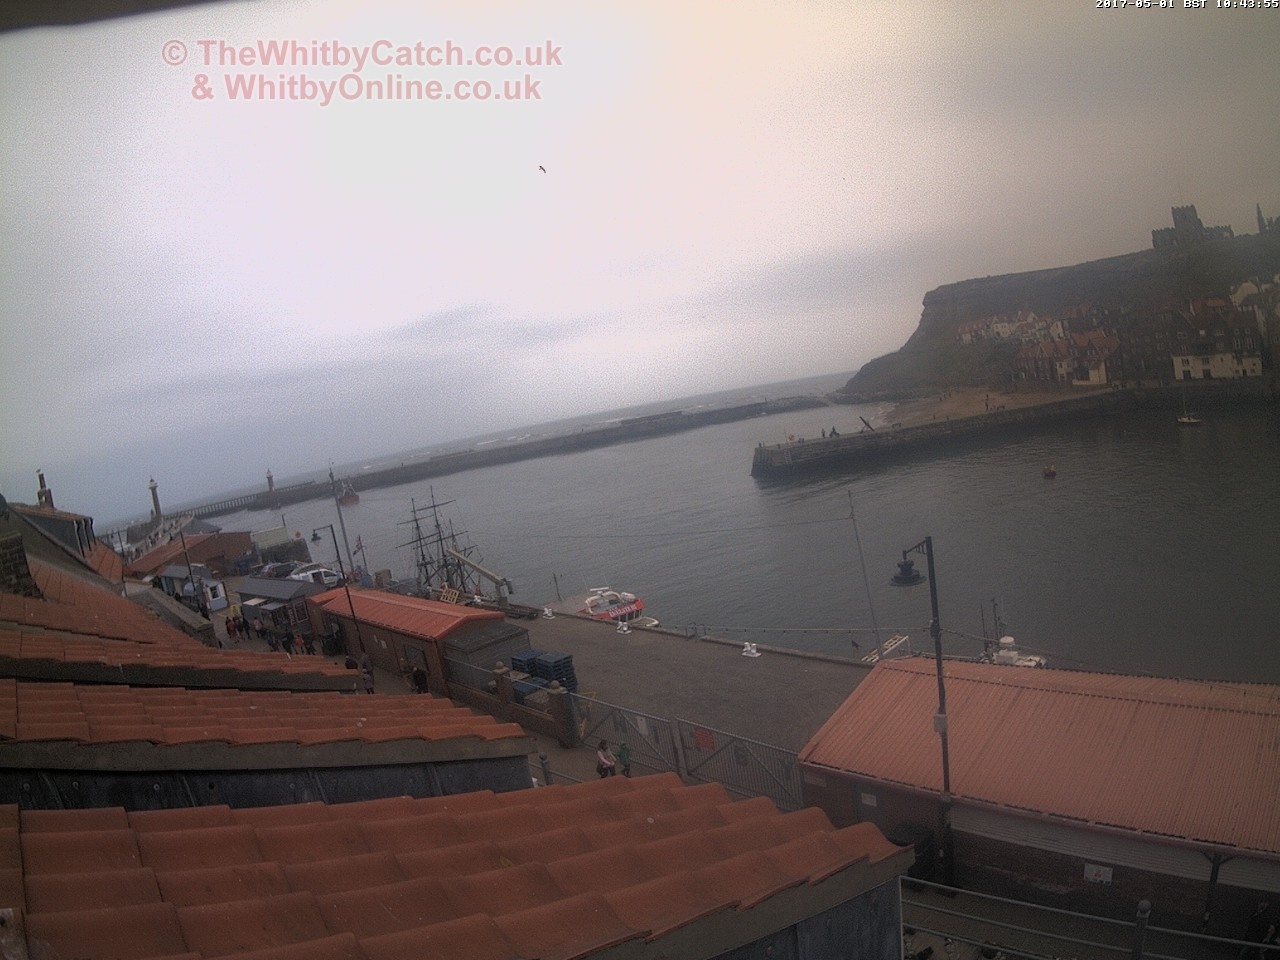 Whitby Mon 1st May 2017 10:44.